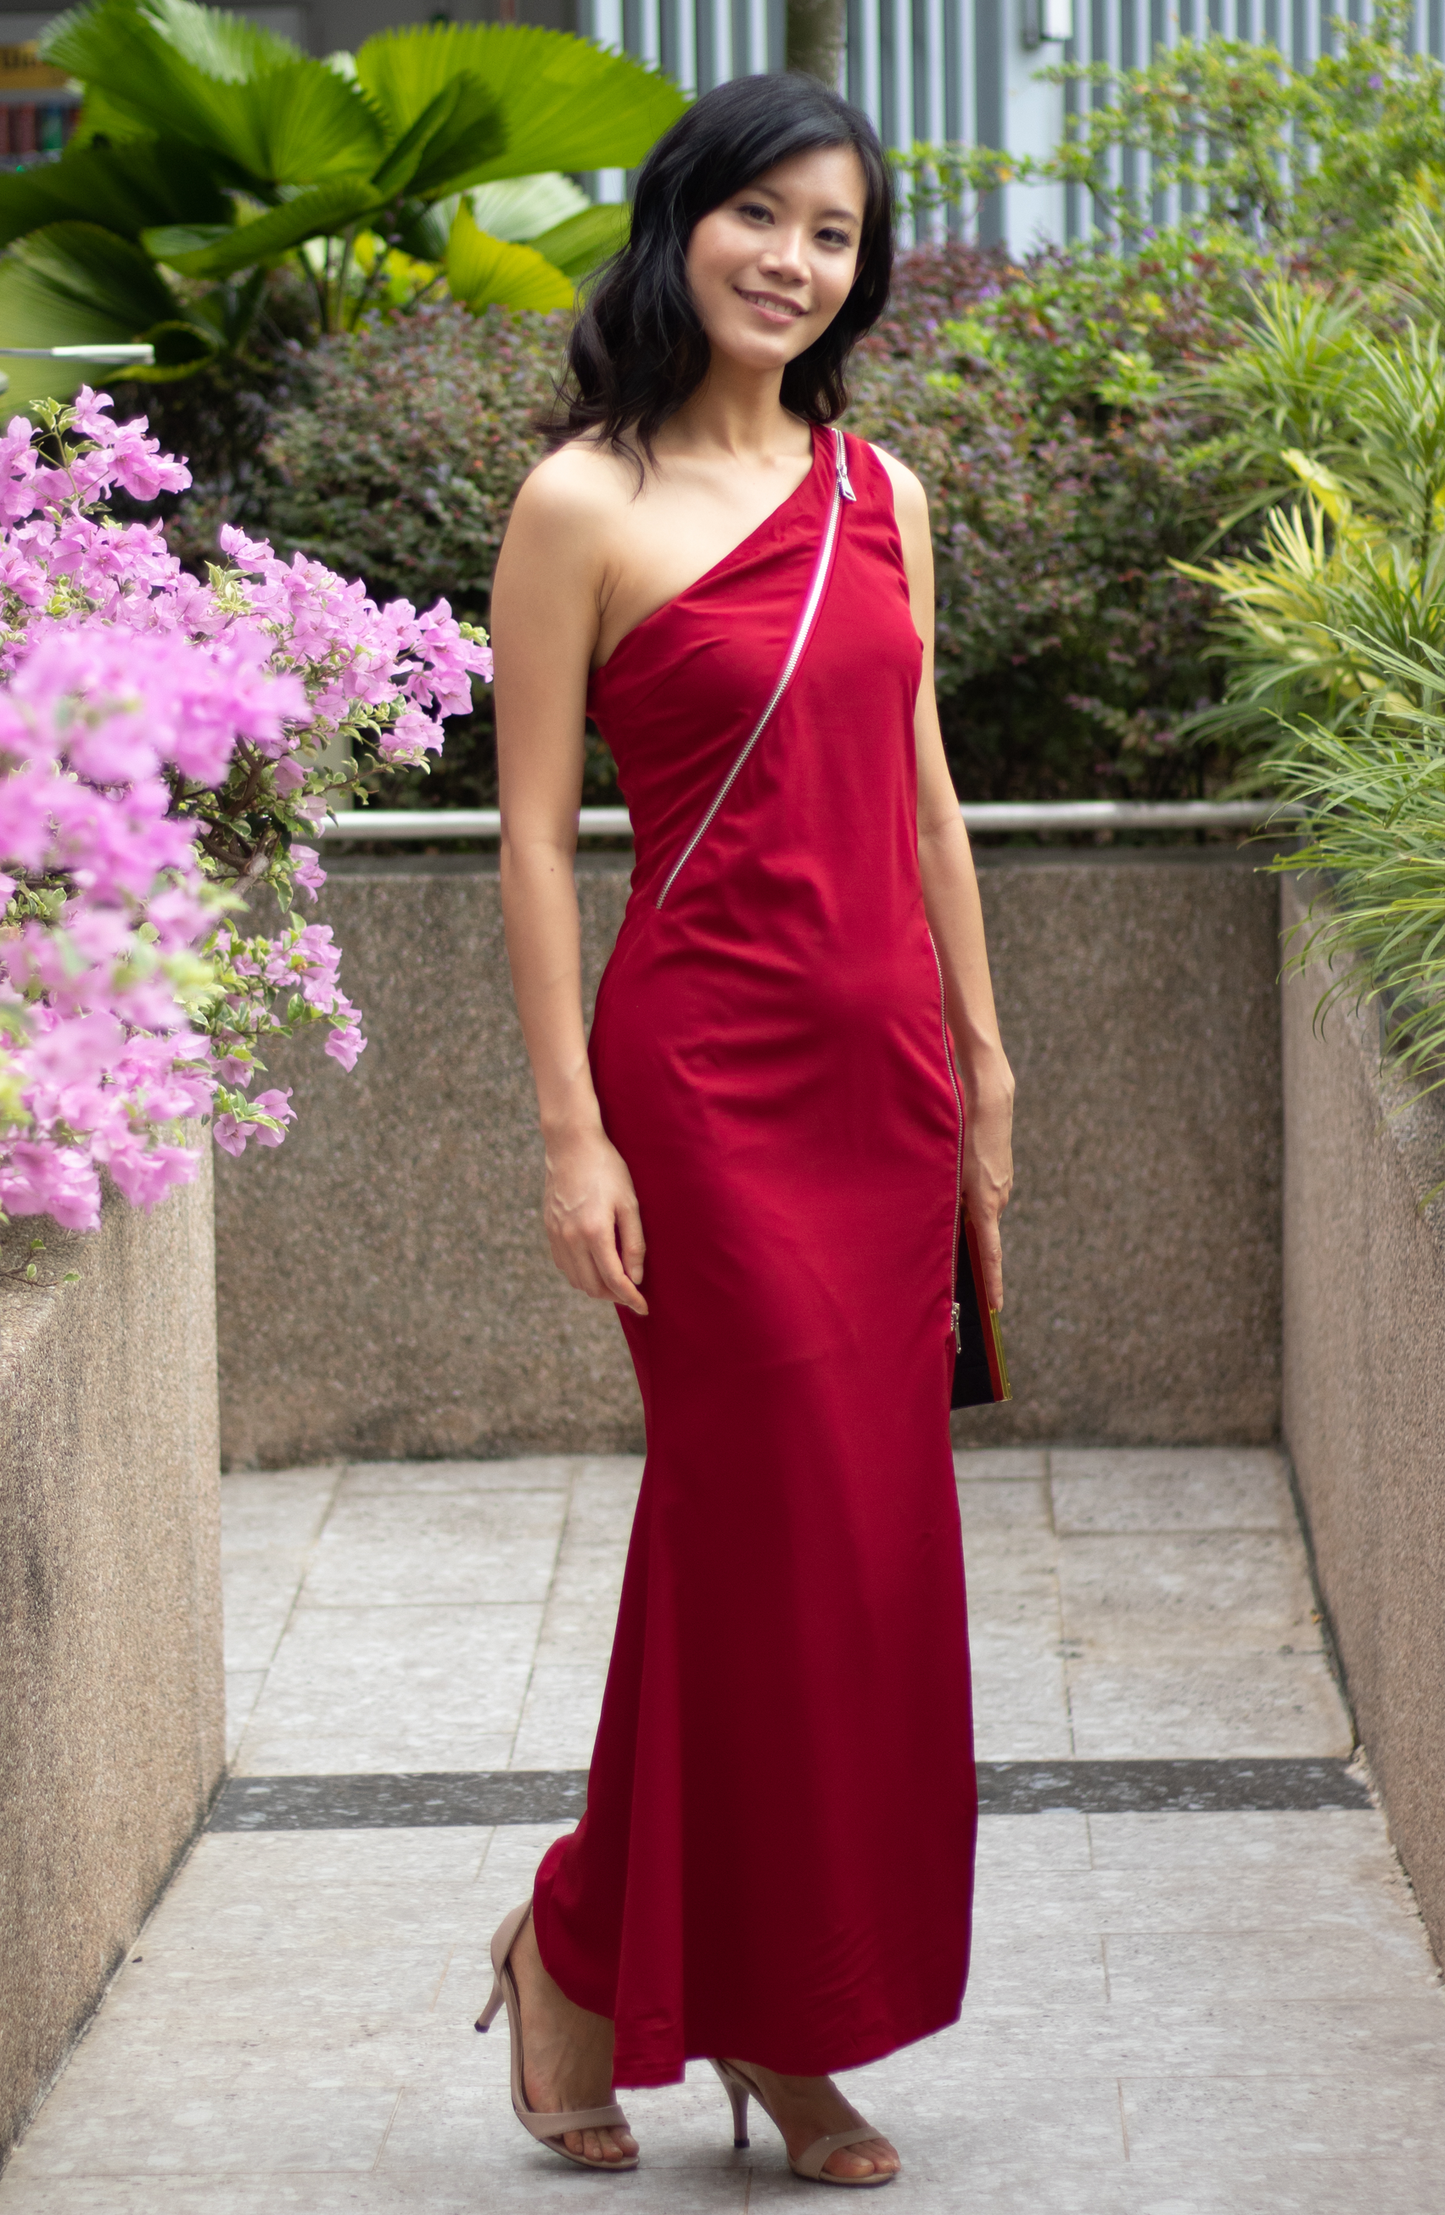 Adjustable Zip Ruby Red One Shoulder Casual Evening Maxi Dress Gown